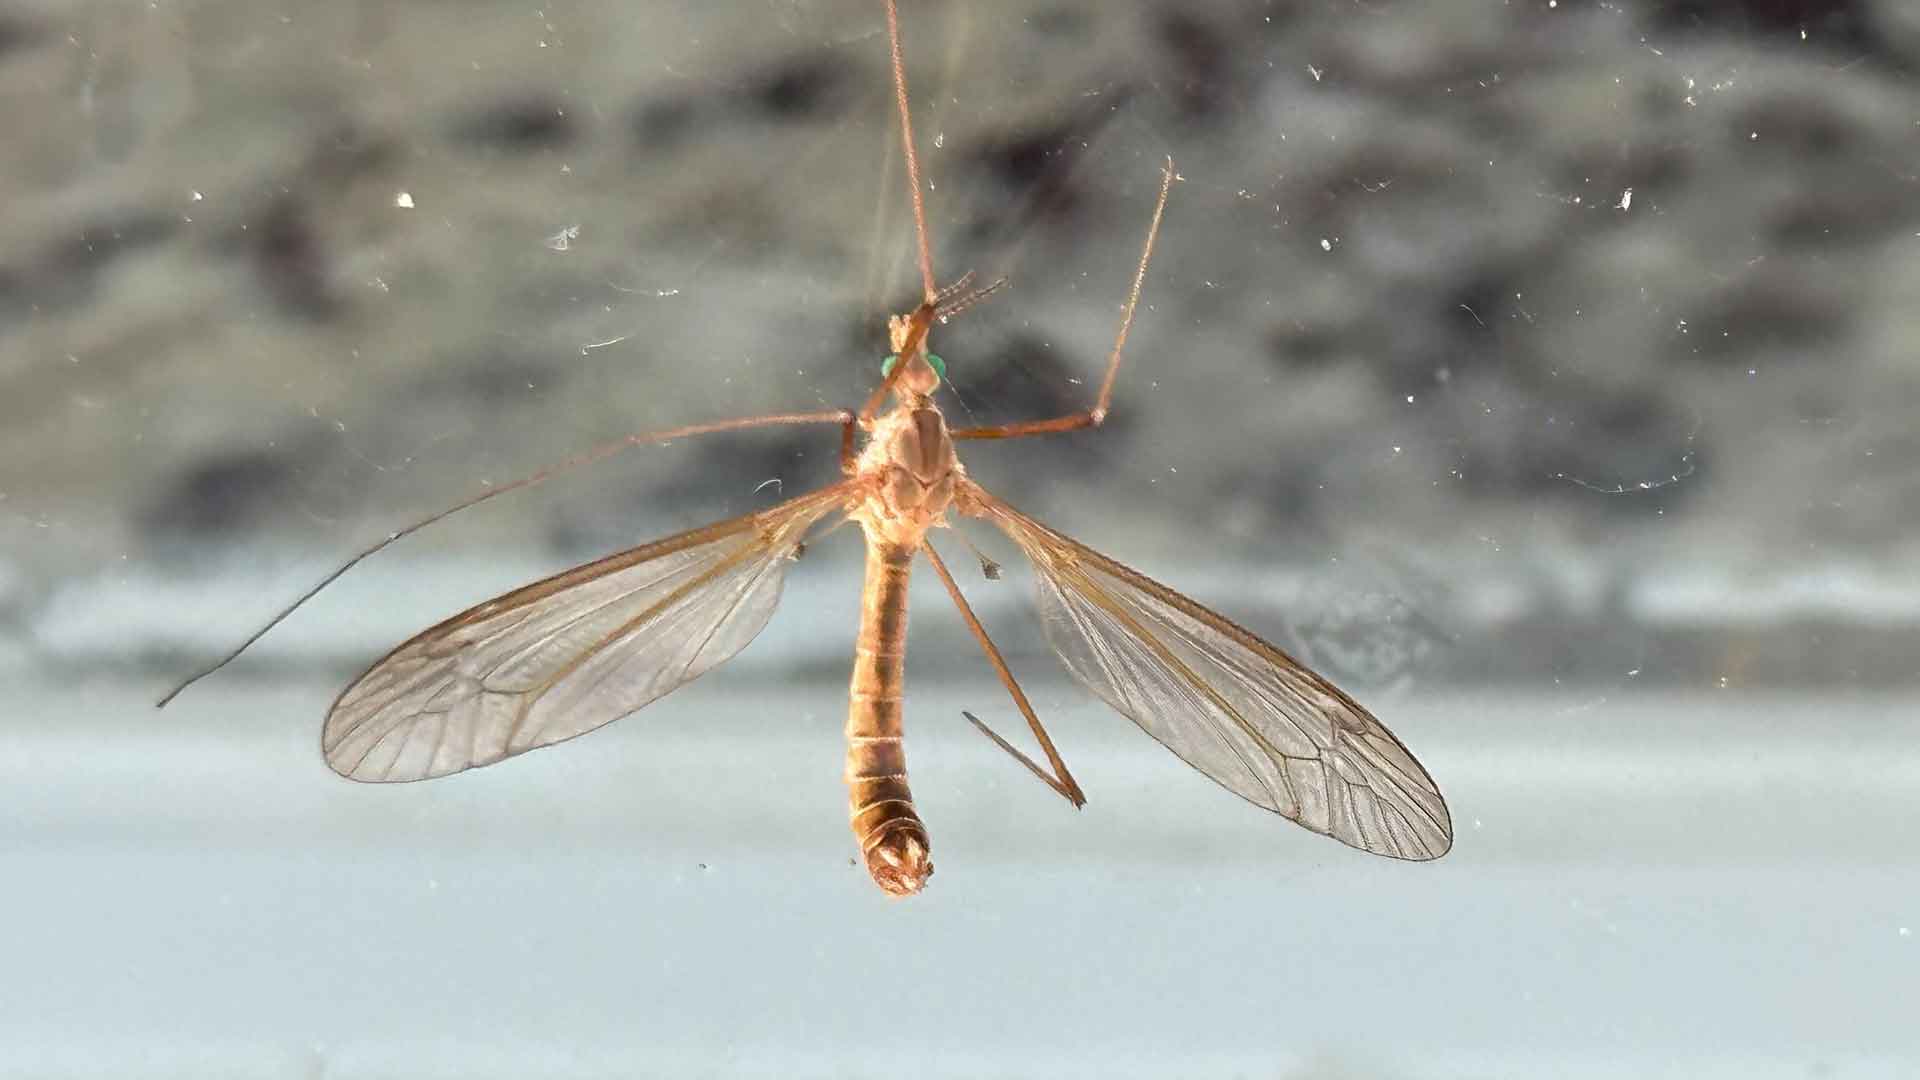 What are those giant mosquito-like insects? Just harmless crane flies,
a sure sign of spring